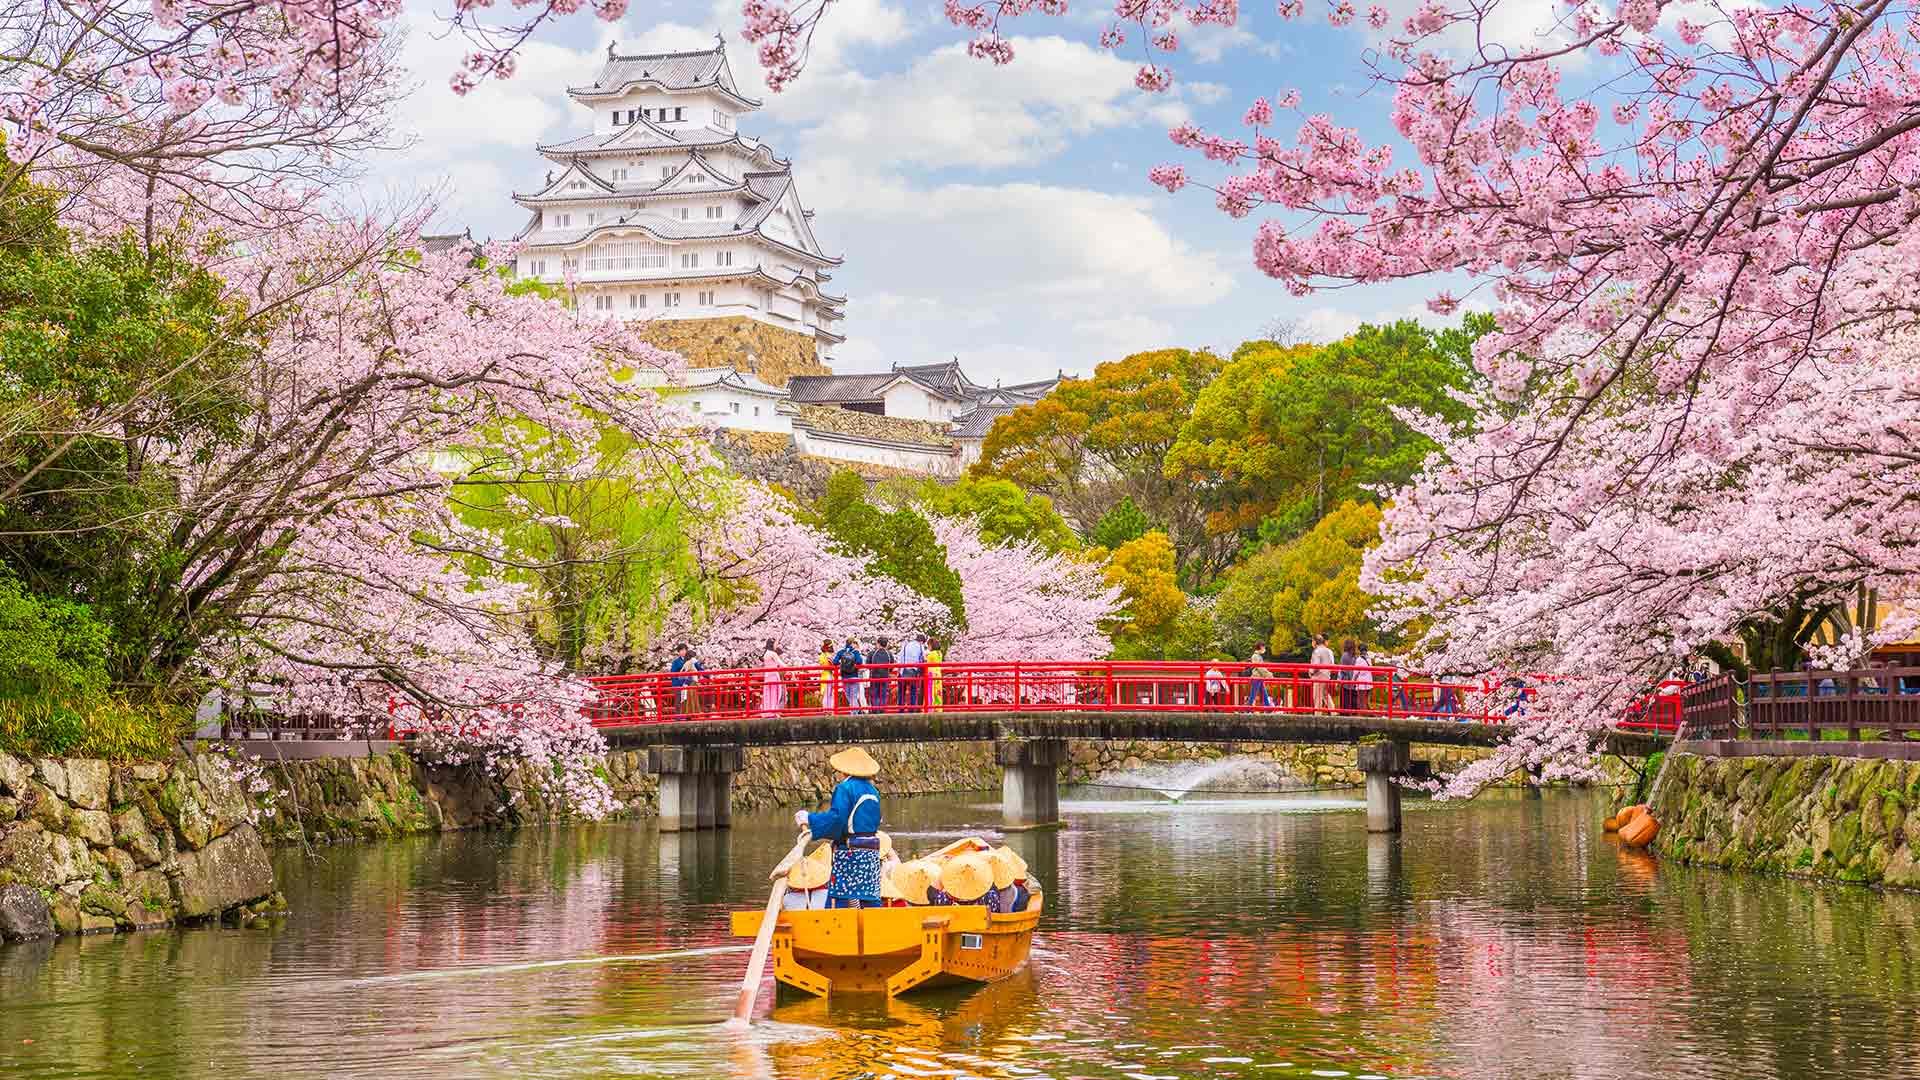 How to Celebrate Cherry Blossom Season in Japan